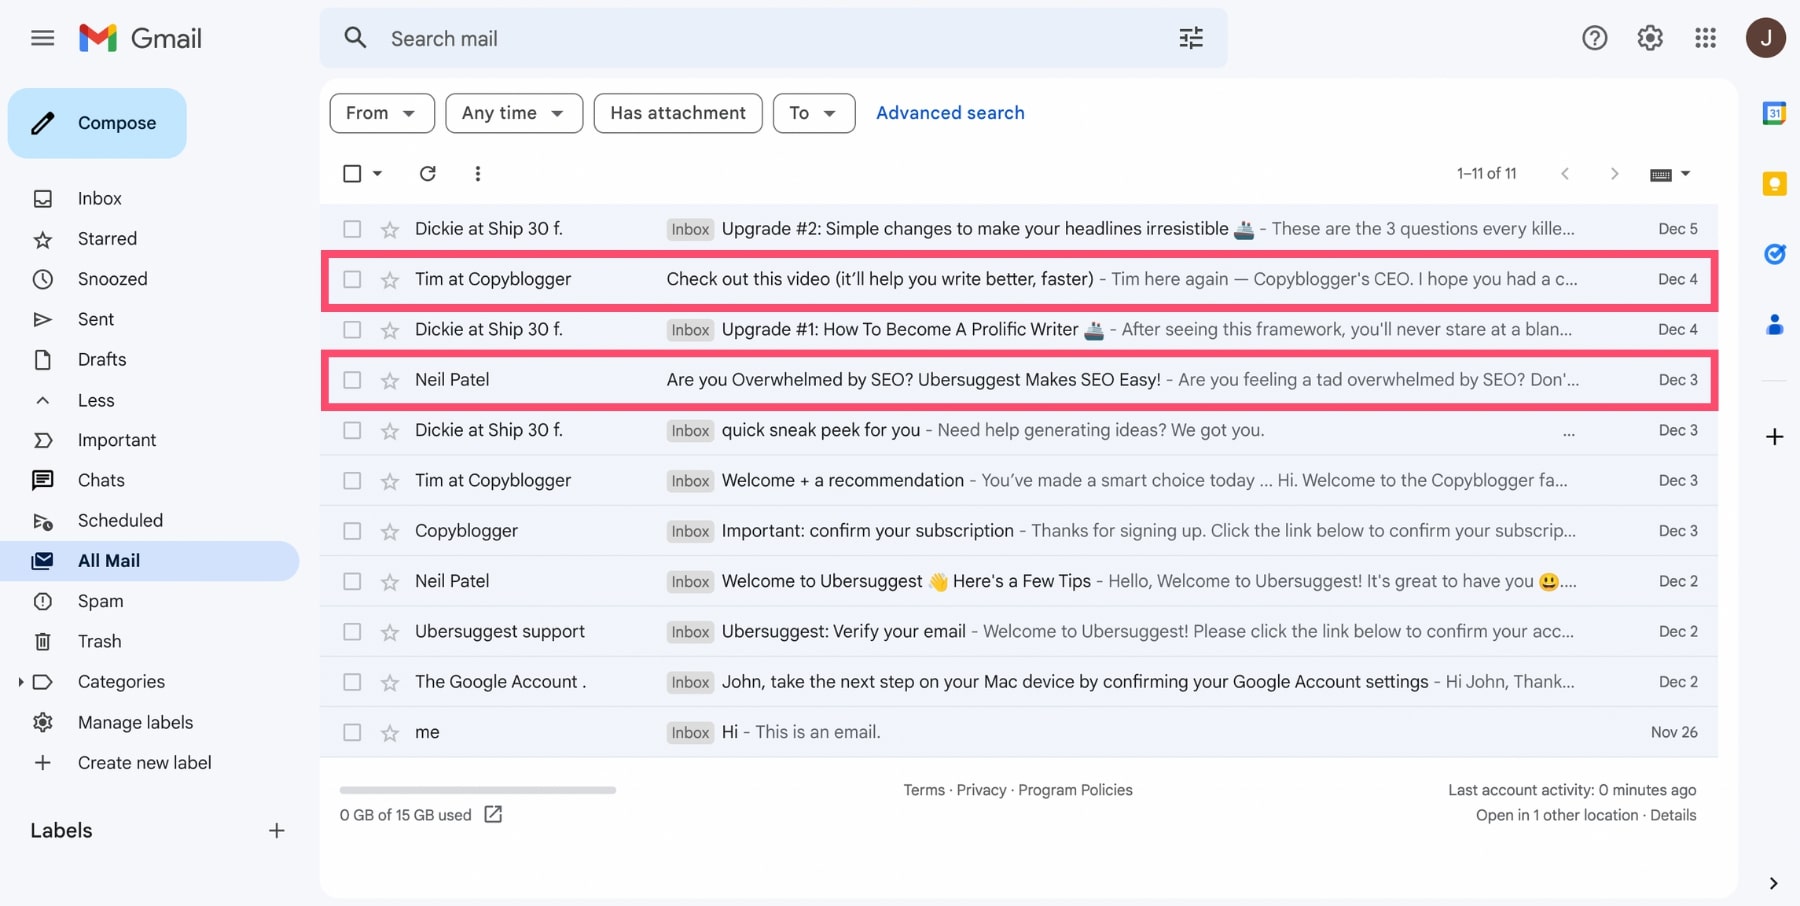 Archived emails in Gmail